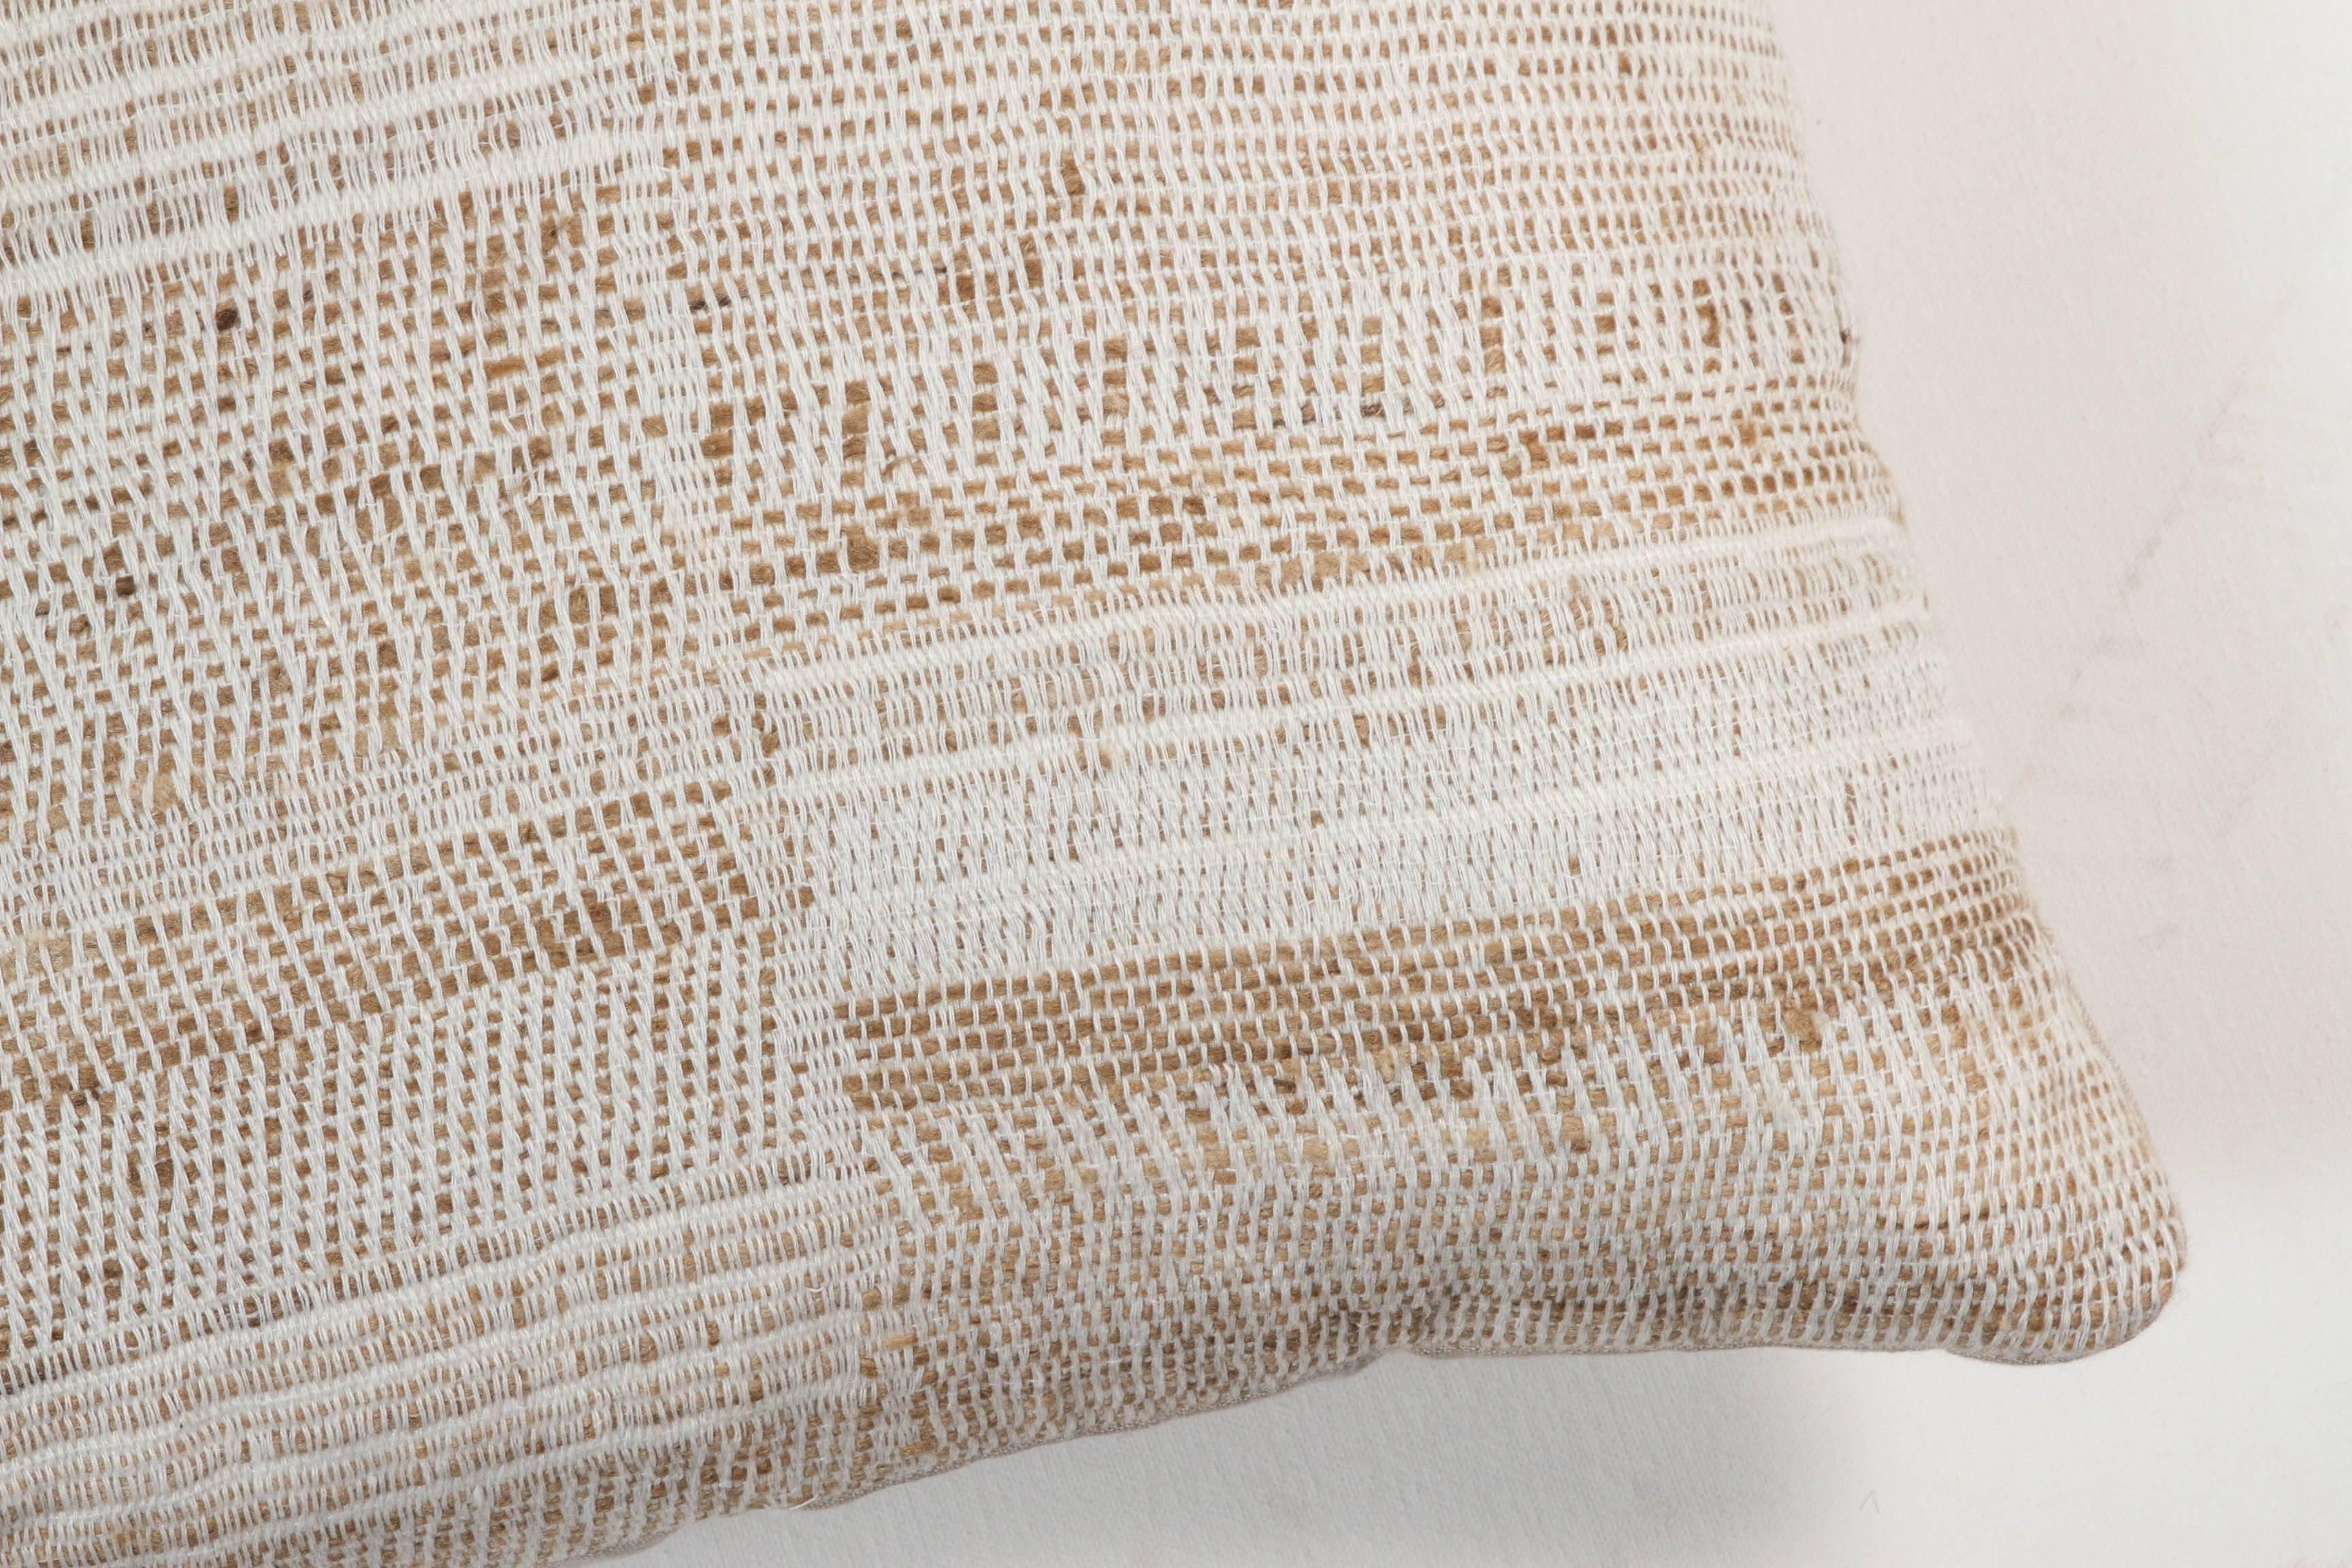 A contemporary line of cushions, pillows, throws, bedcovers, bedspreads and yardage hand woven in India on antique Jacquard looms. Handspun wool, cotton, linen, and raw silk give the textiles an appealing uneven quality.

This wool and raw tussar